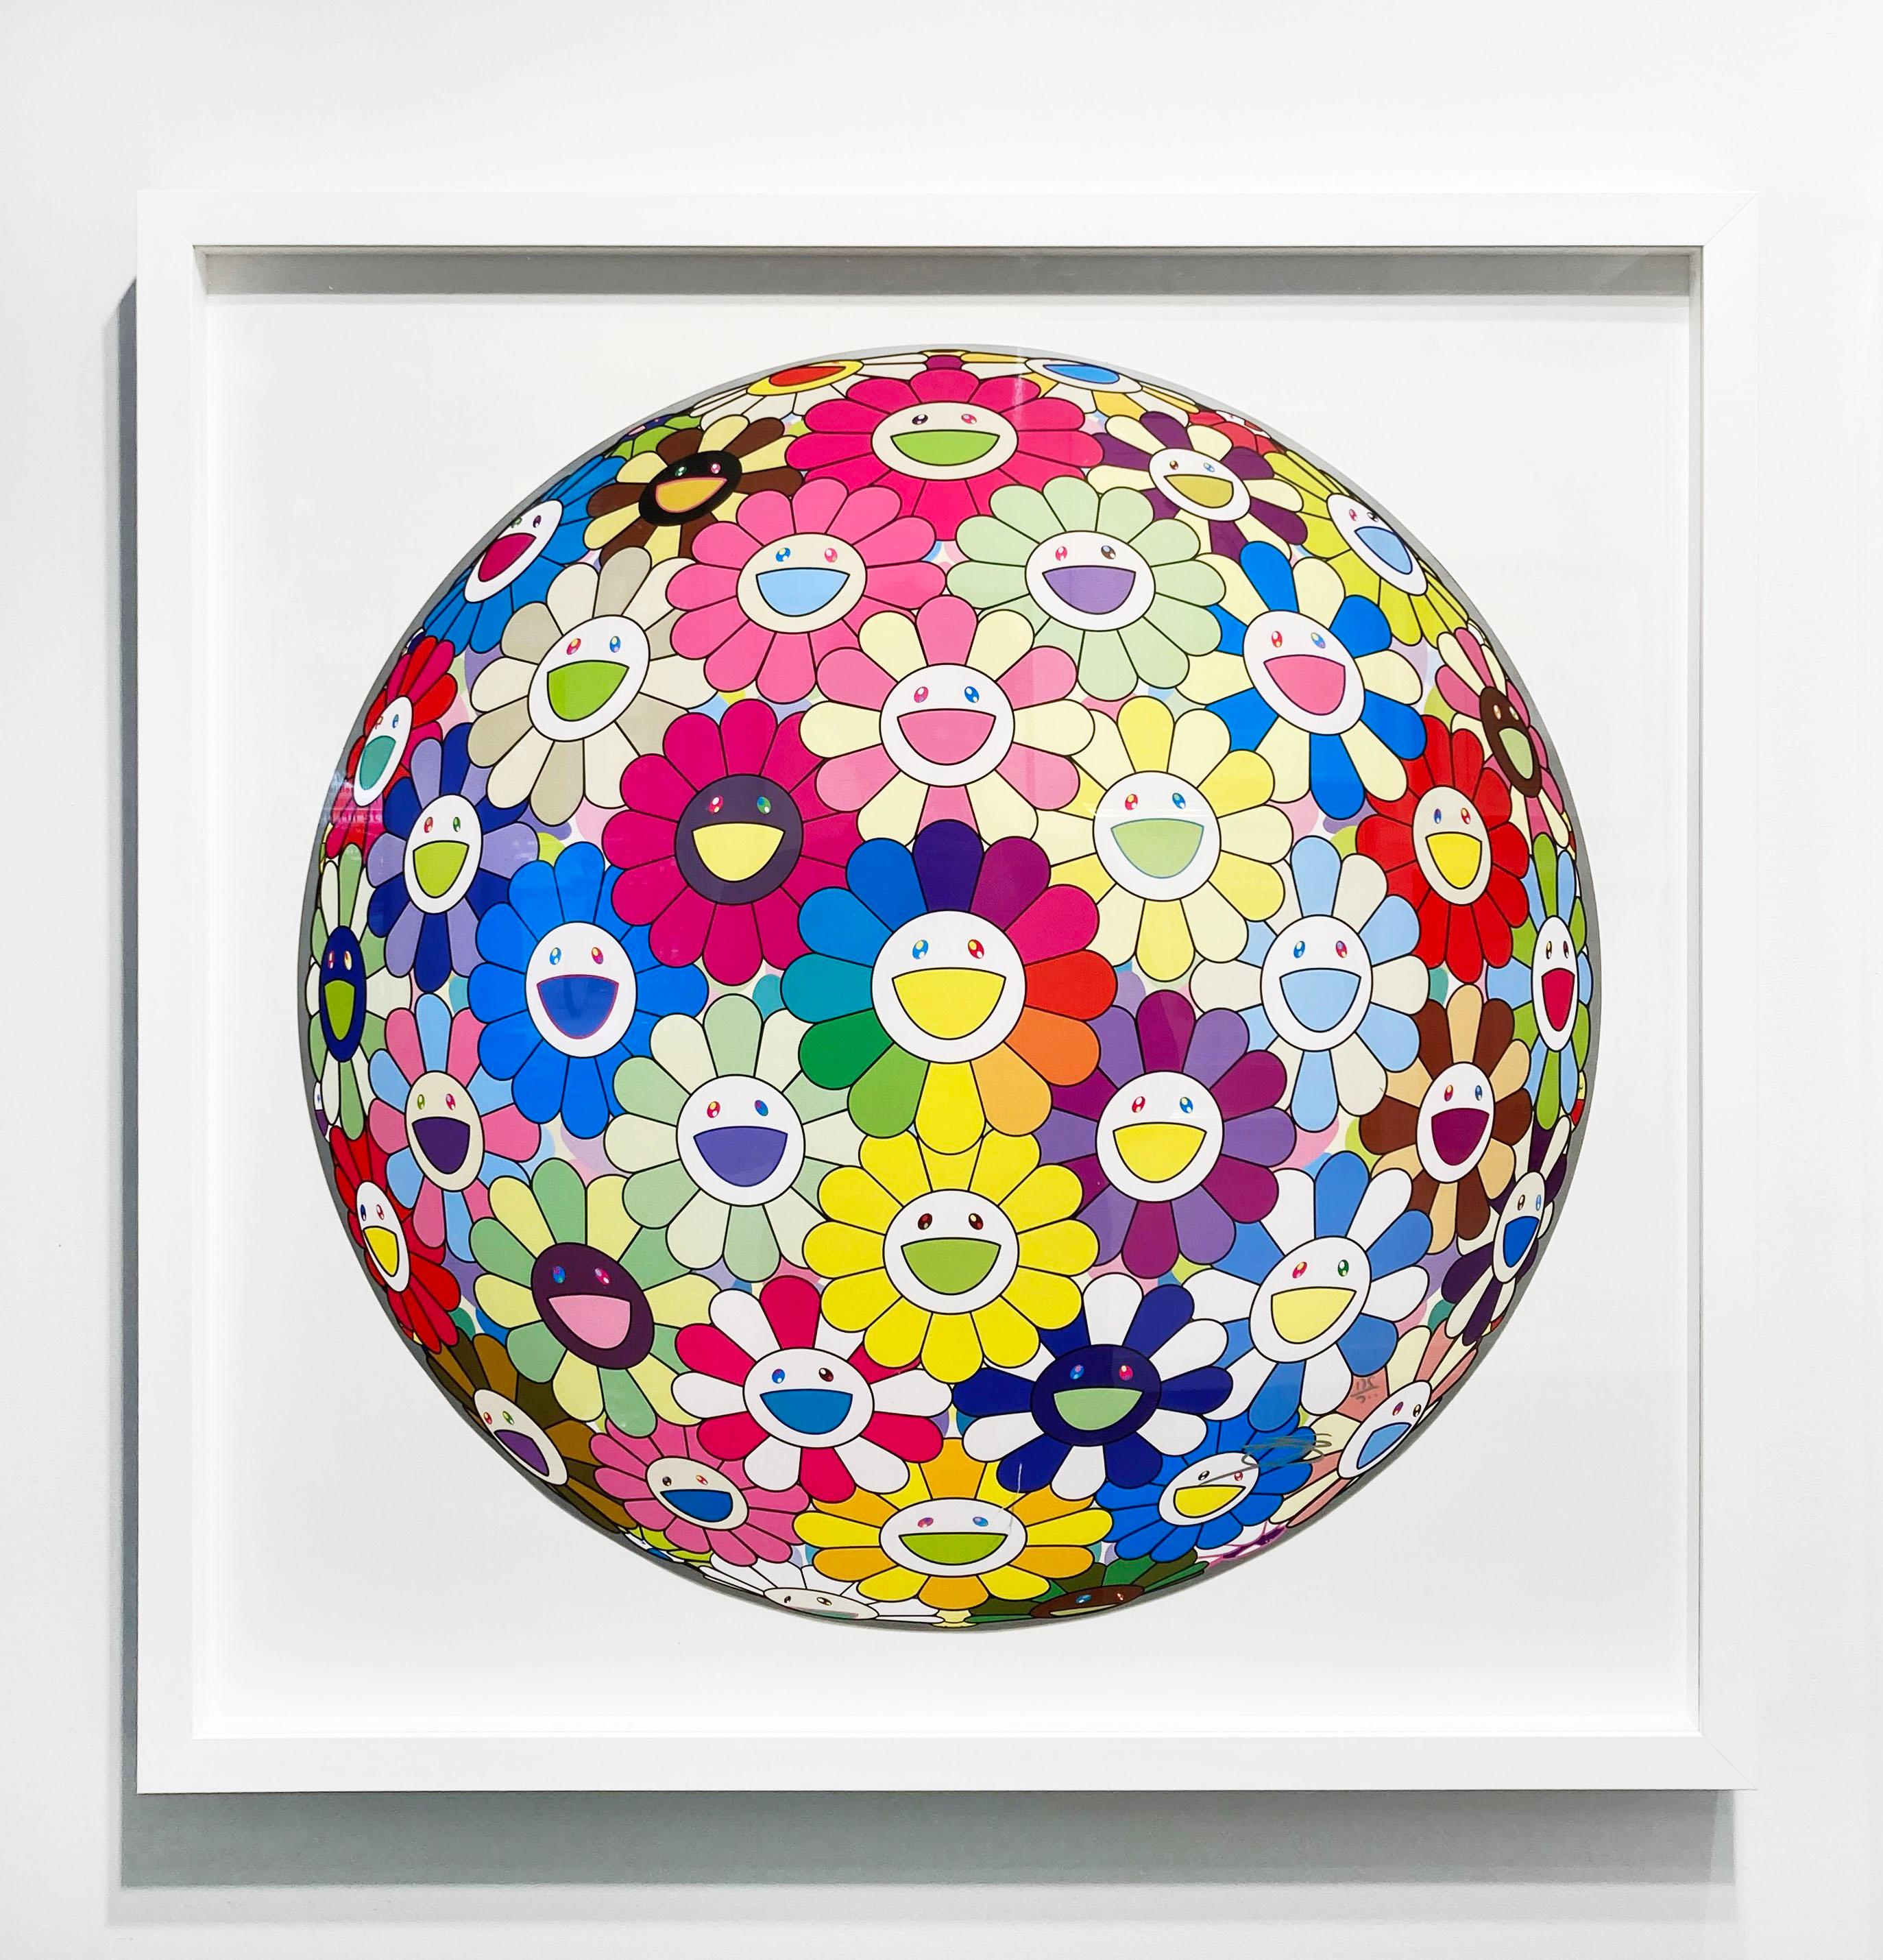 Burying My Face in the Field of Flower - Contemporary Print by Takashi Murakami